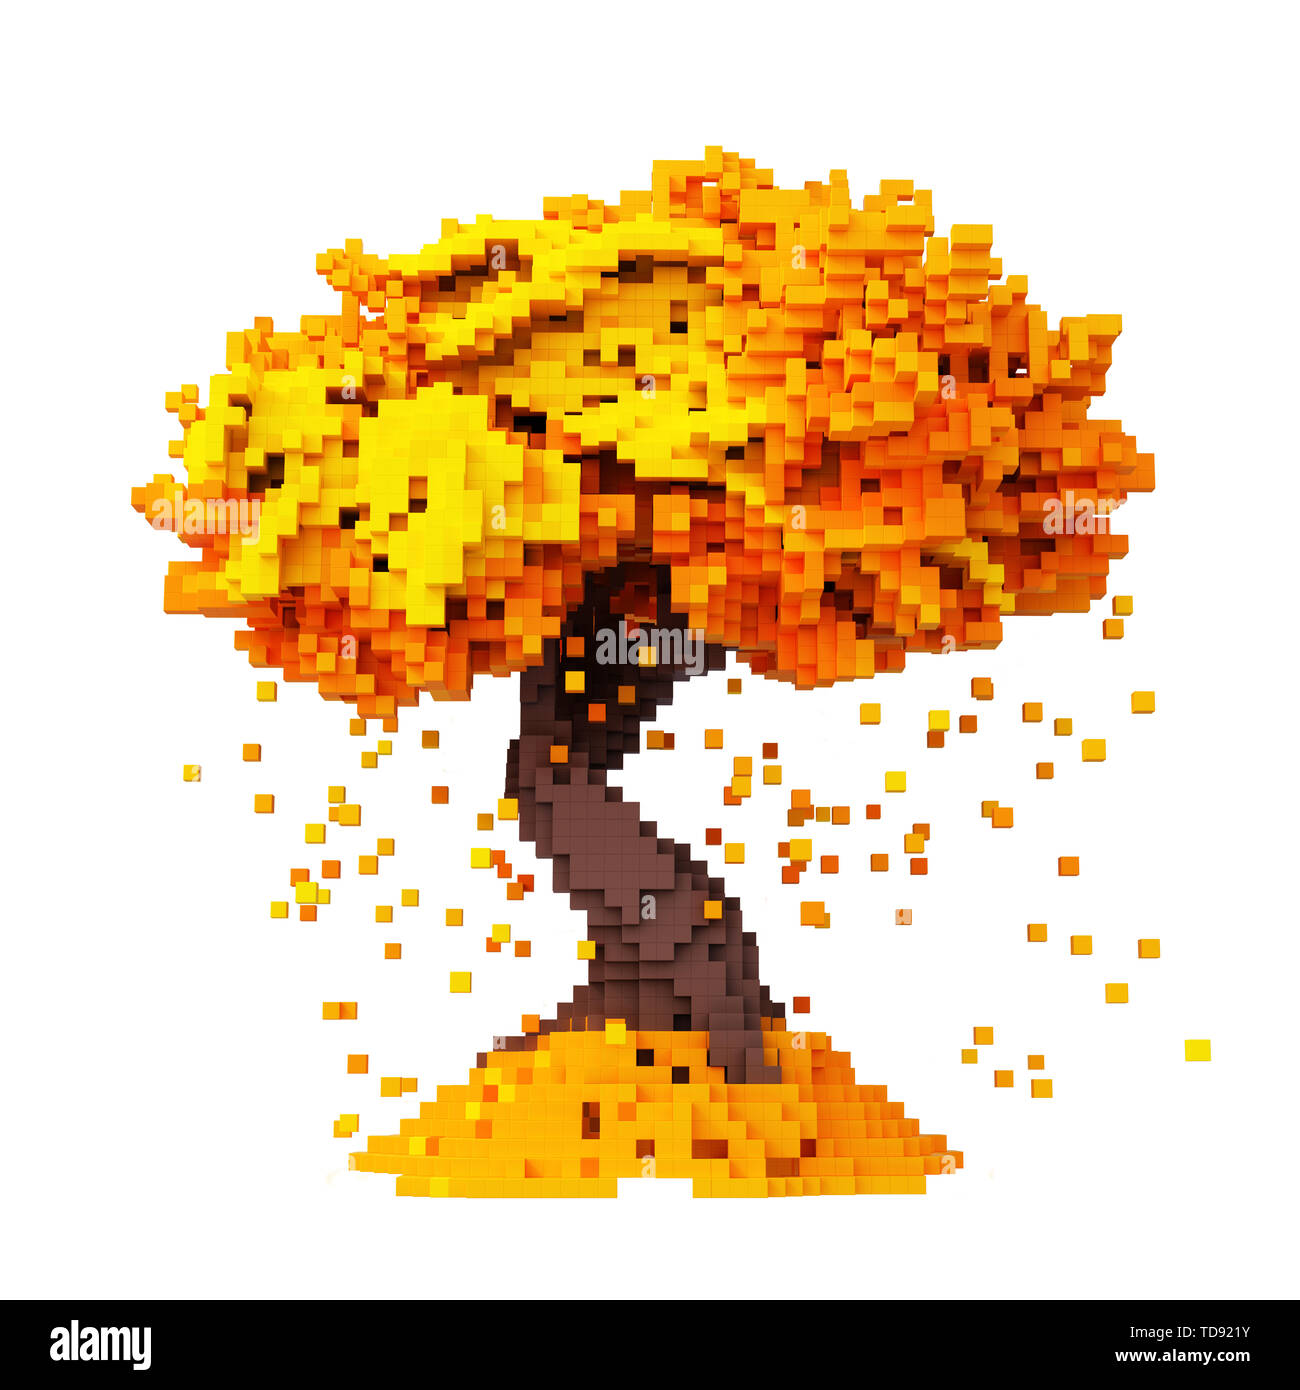 Digital Pixelated Falling Leaves From An Autumn Tree Isolated On White Background. 3D Illustration. Stock Photo